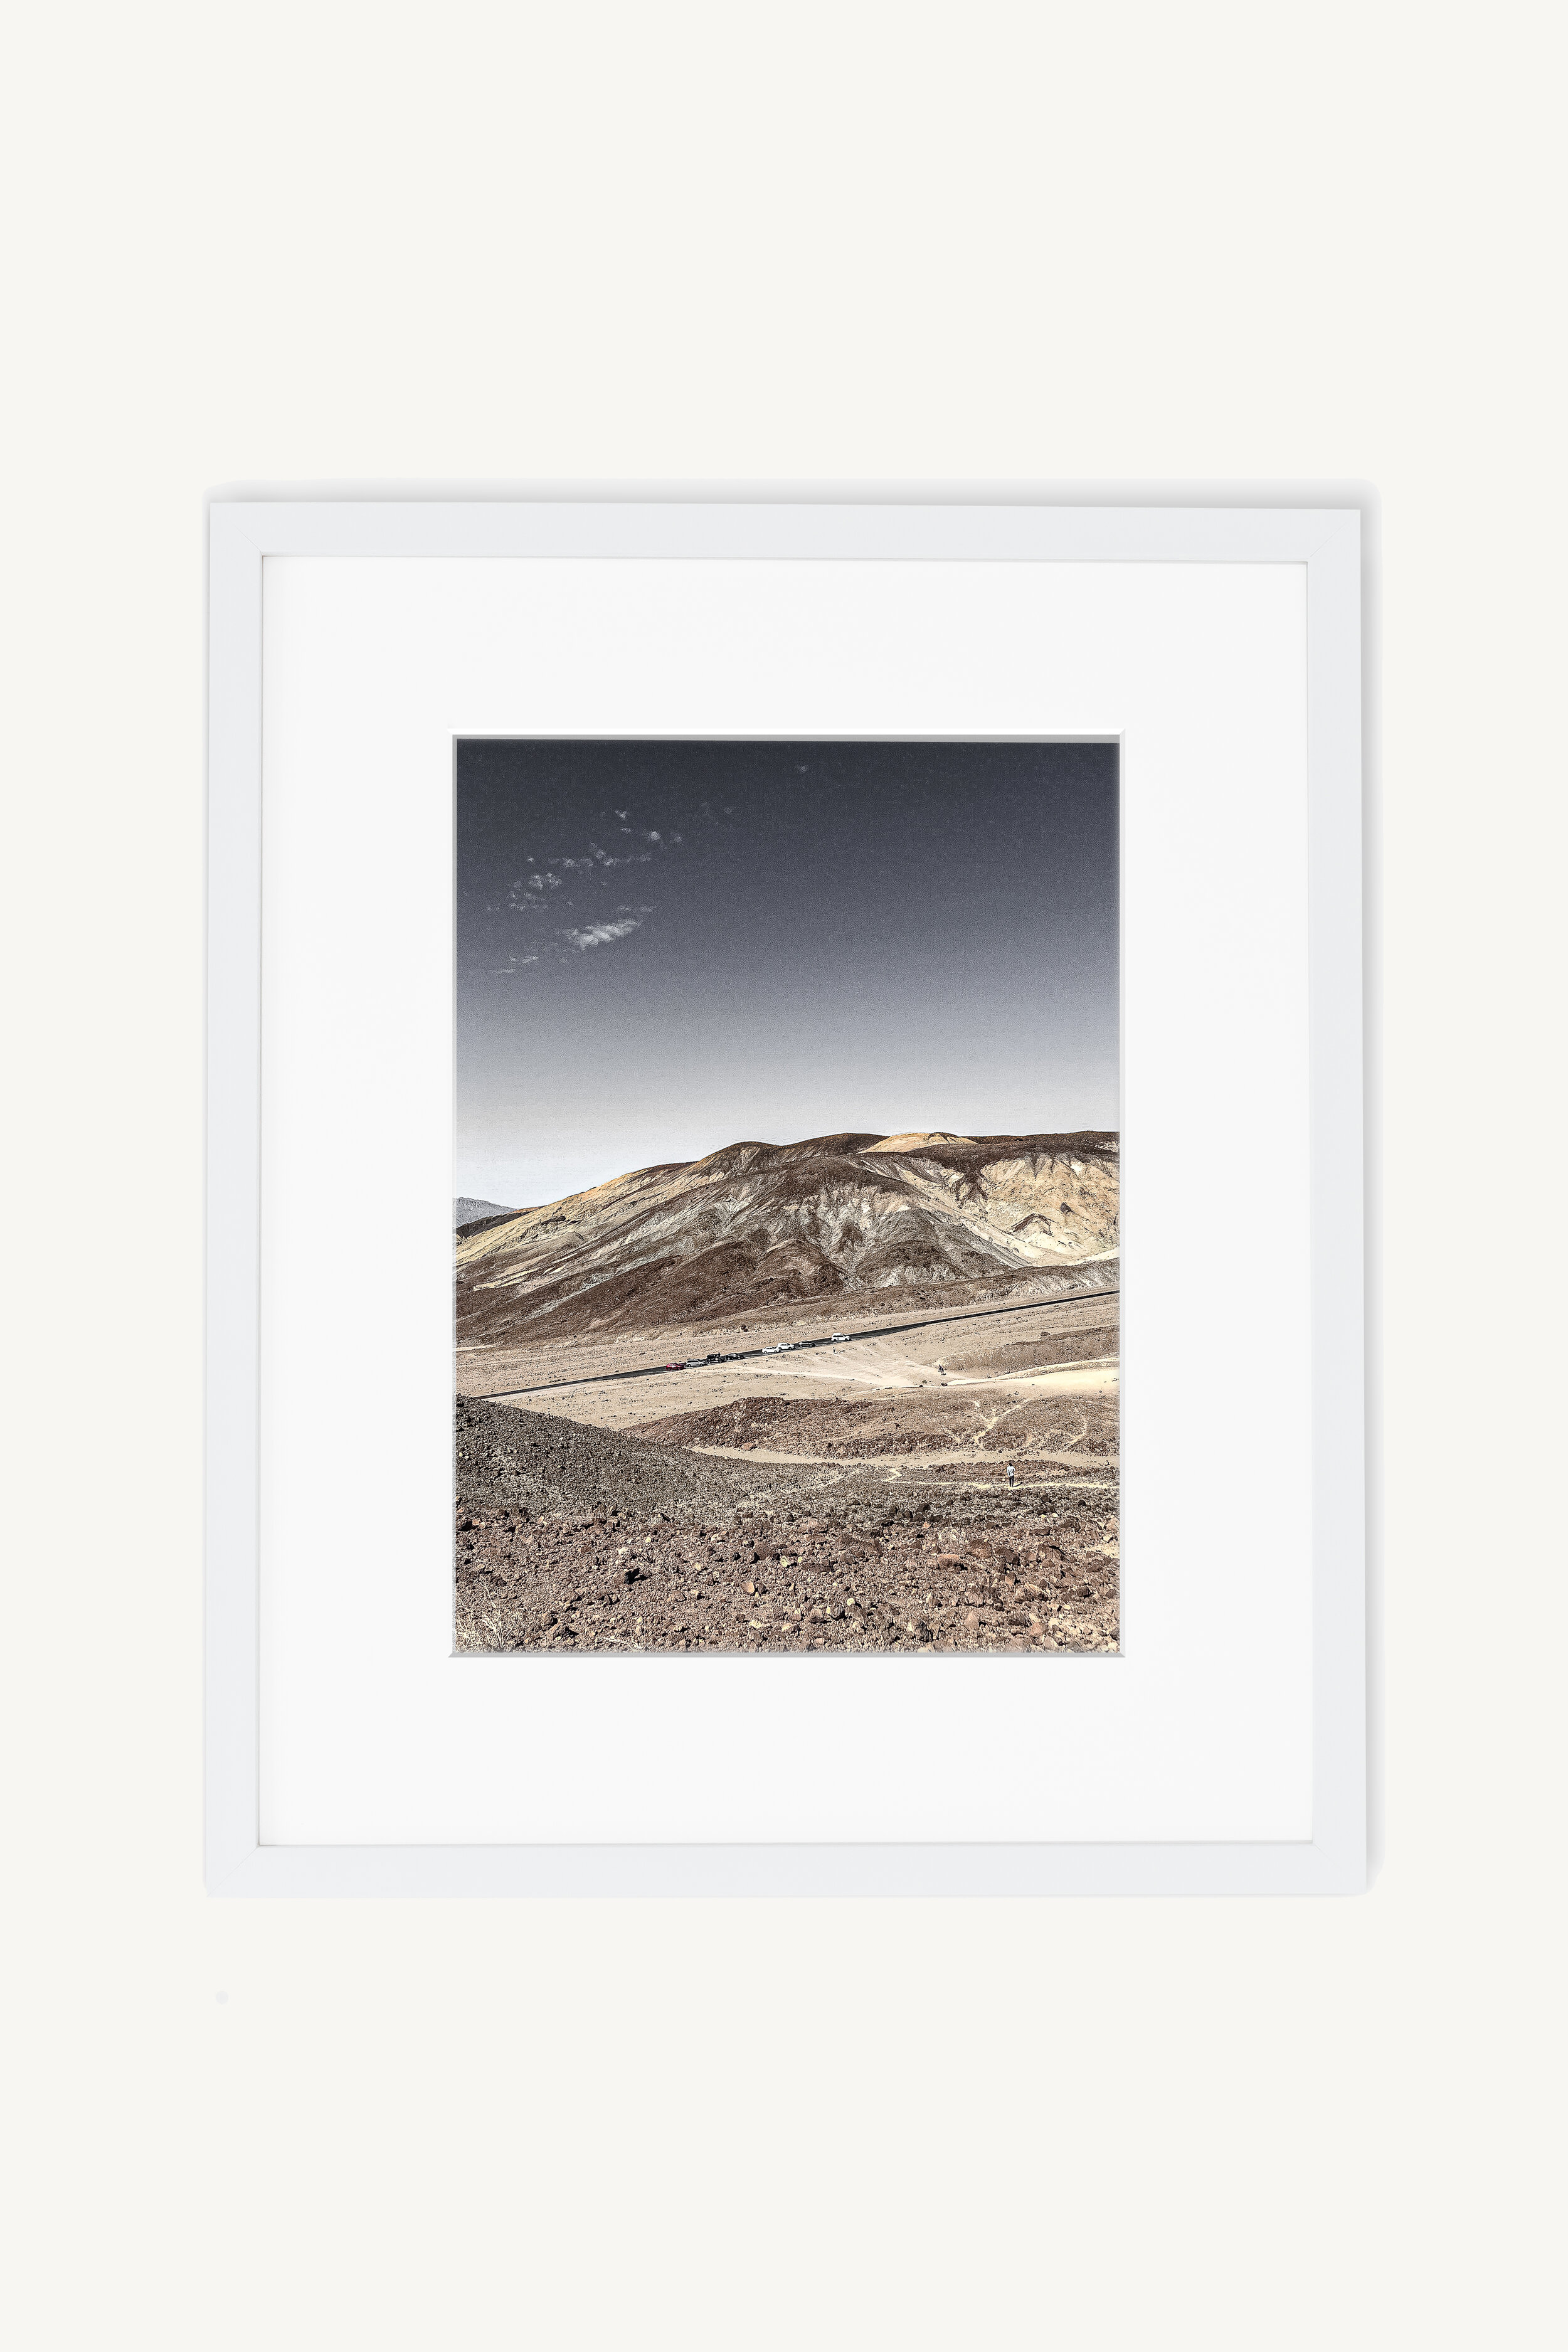 National Park Death — Prints PRINTS Print Framed | BADWATER Valley Badwater